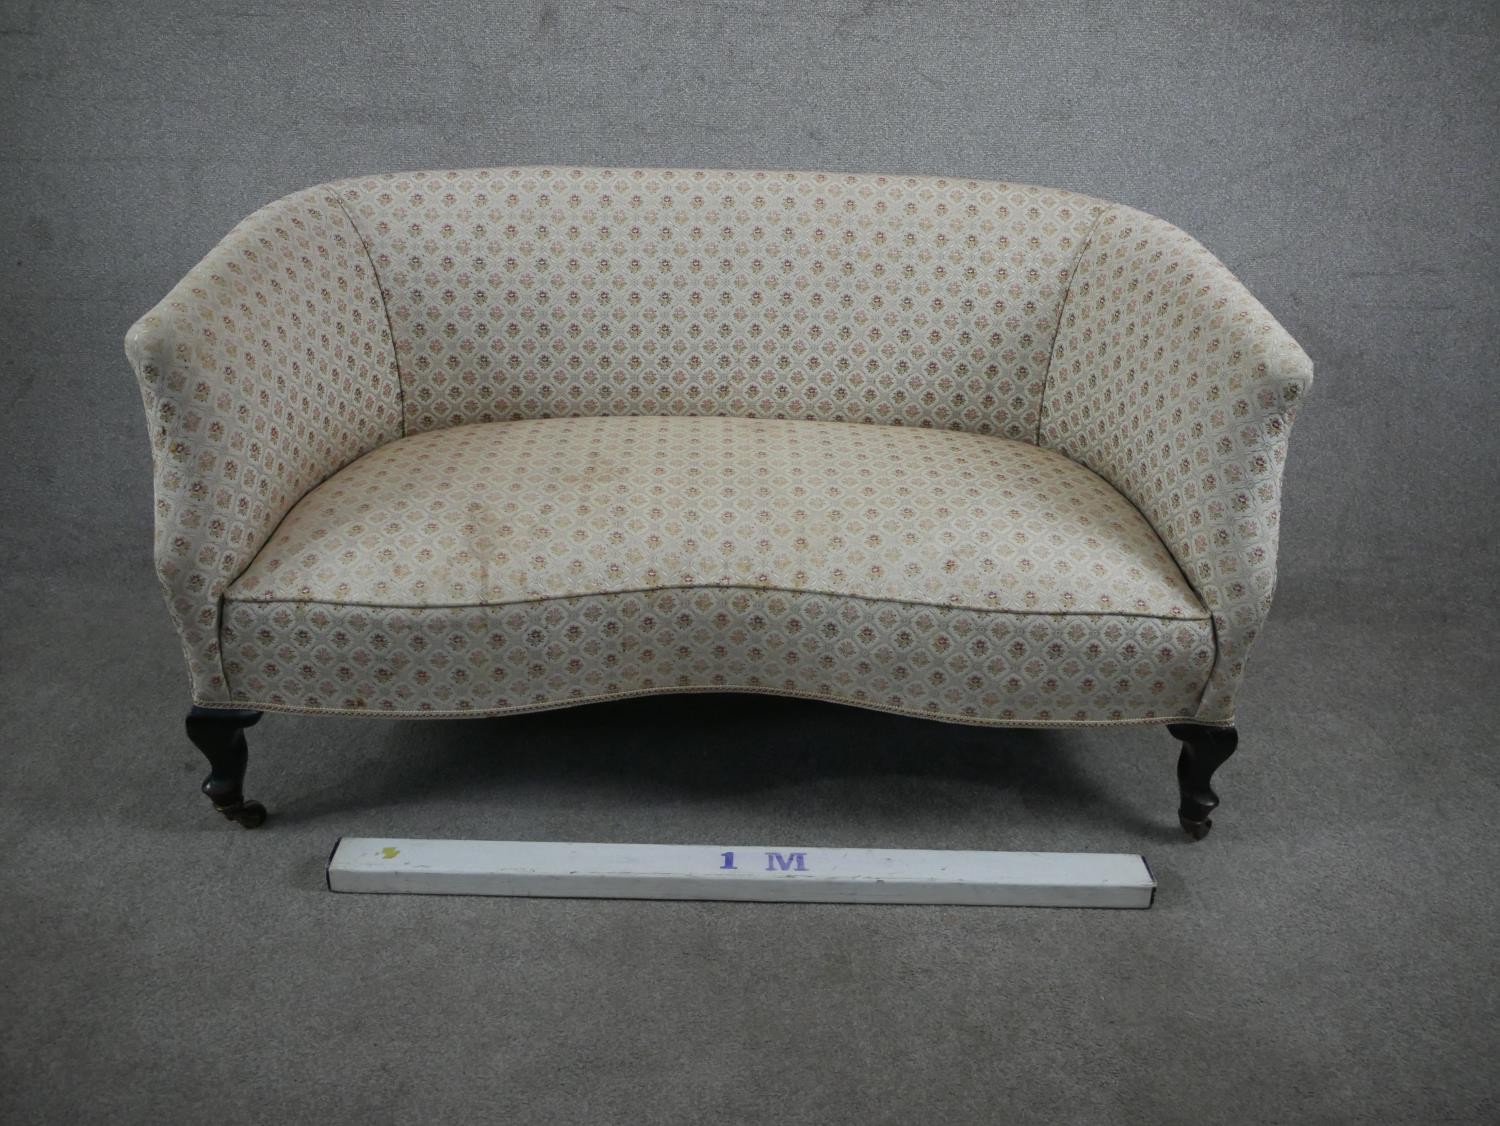 A late 19th/early 20th century two seater sofa, upholstered in patterned ivory fabric, on mahogany - Image 2 of 6